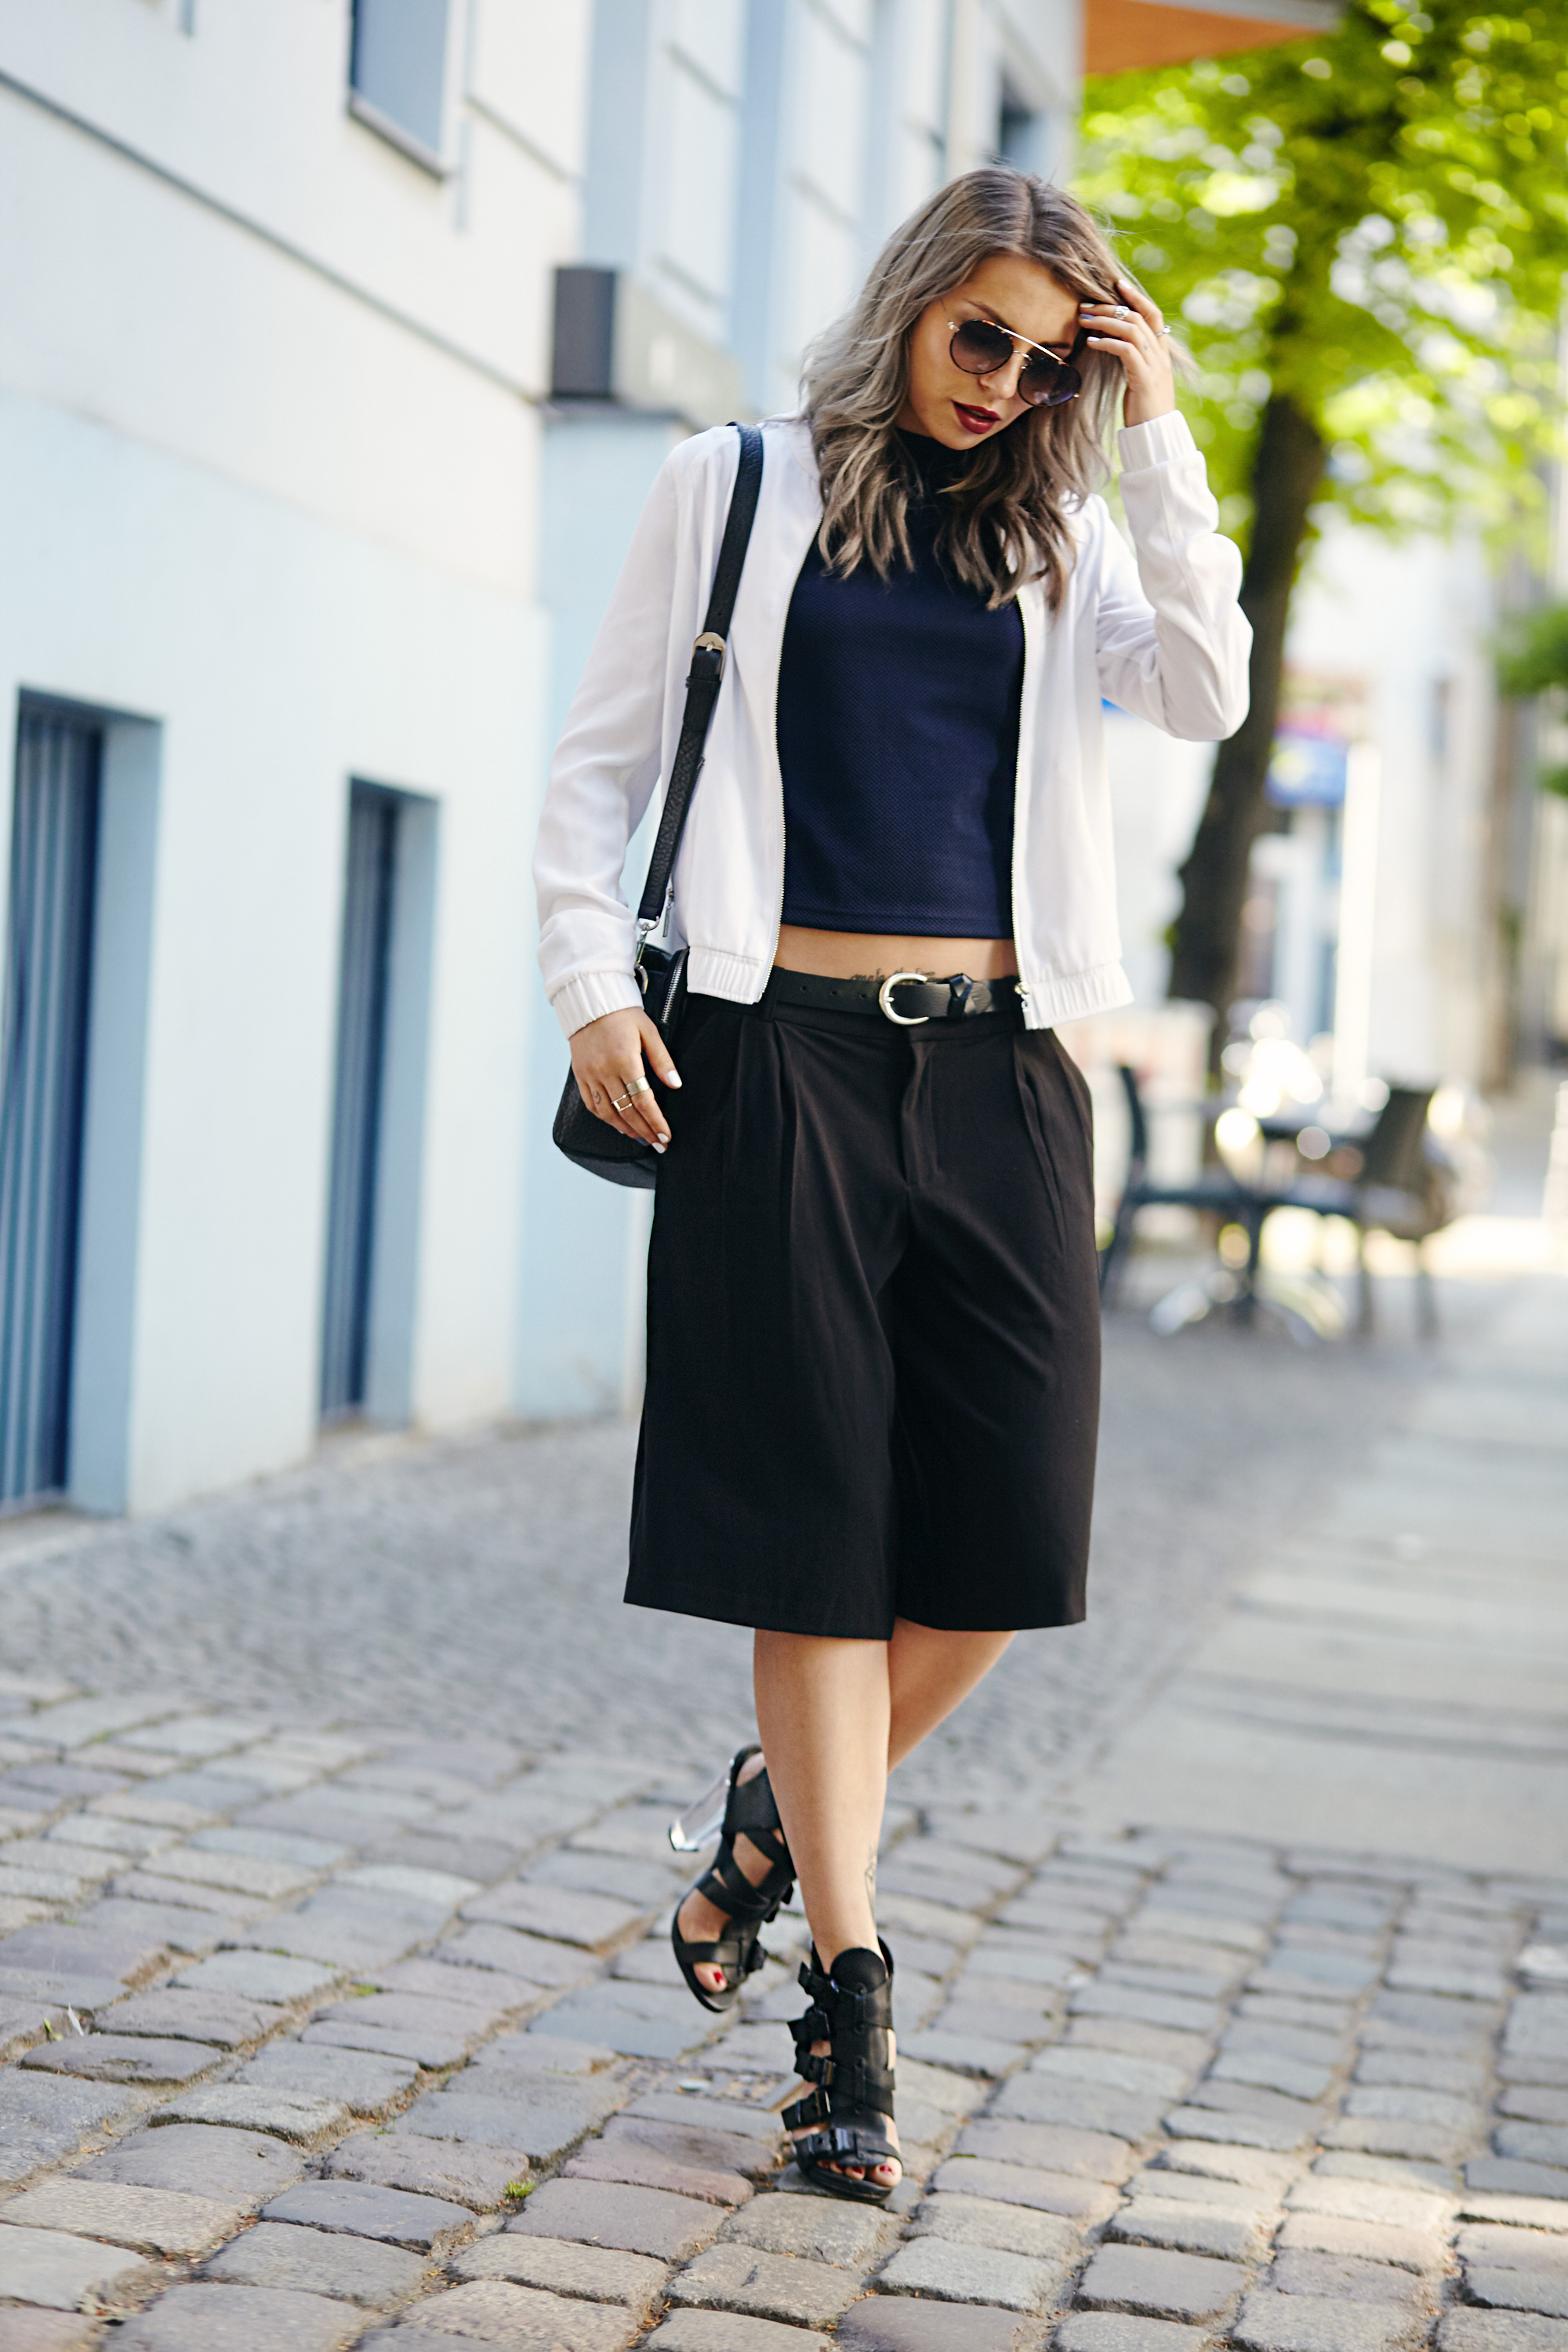 reserved-outfit-ss15-1 culottes berlin clean effordless fashion spring summer outfit